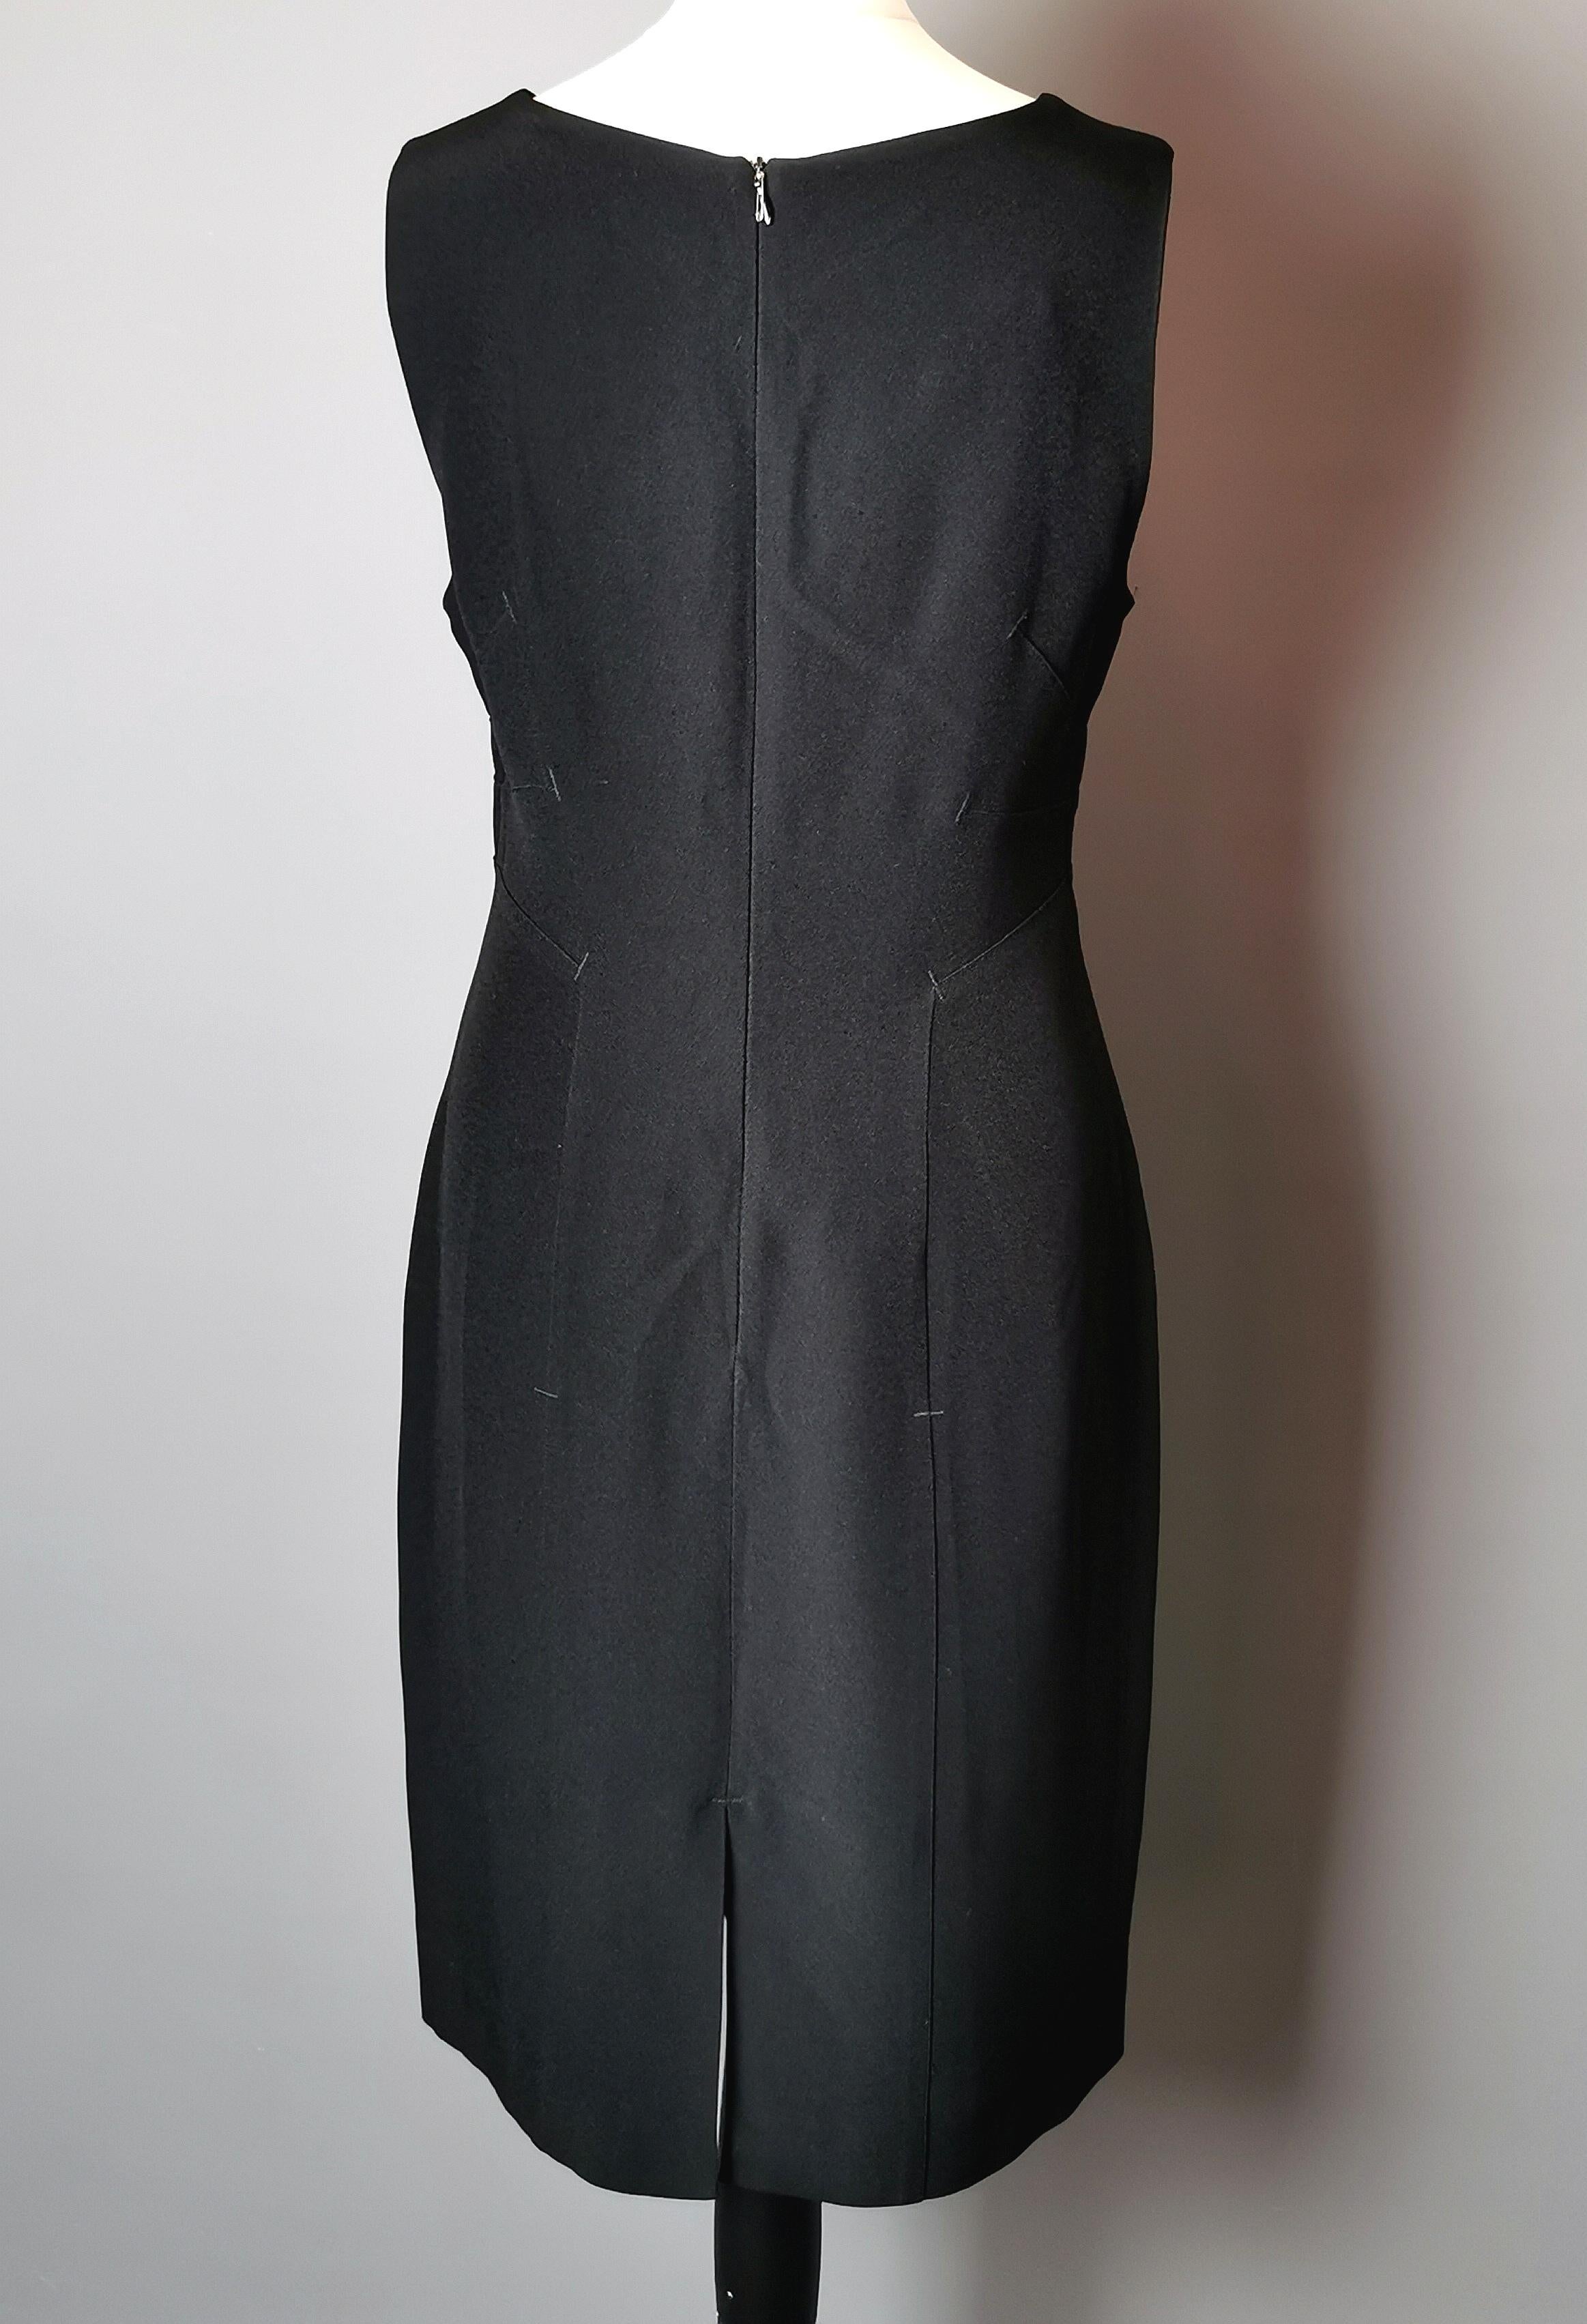 Moschino Cheap and Chic black sheath dress For Sale 6